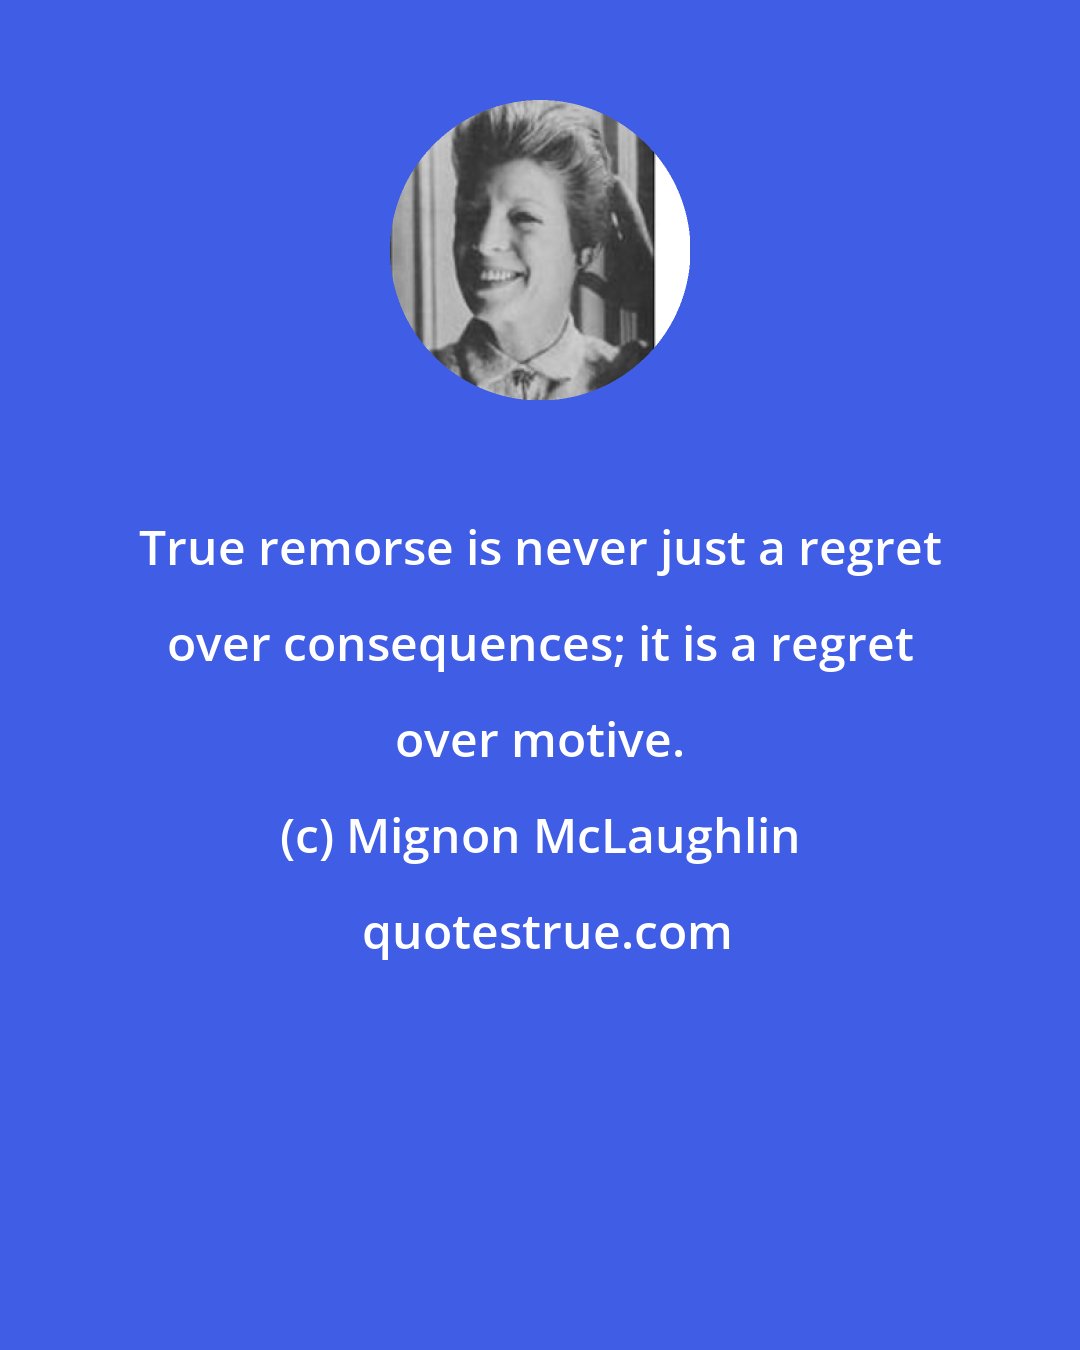 Mignon McLaughlin: True remorse is never just a regret over consequences; it is a regret over motive.